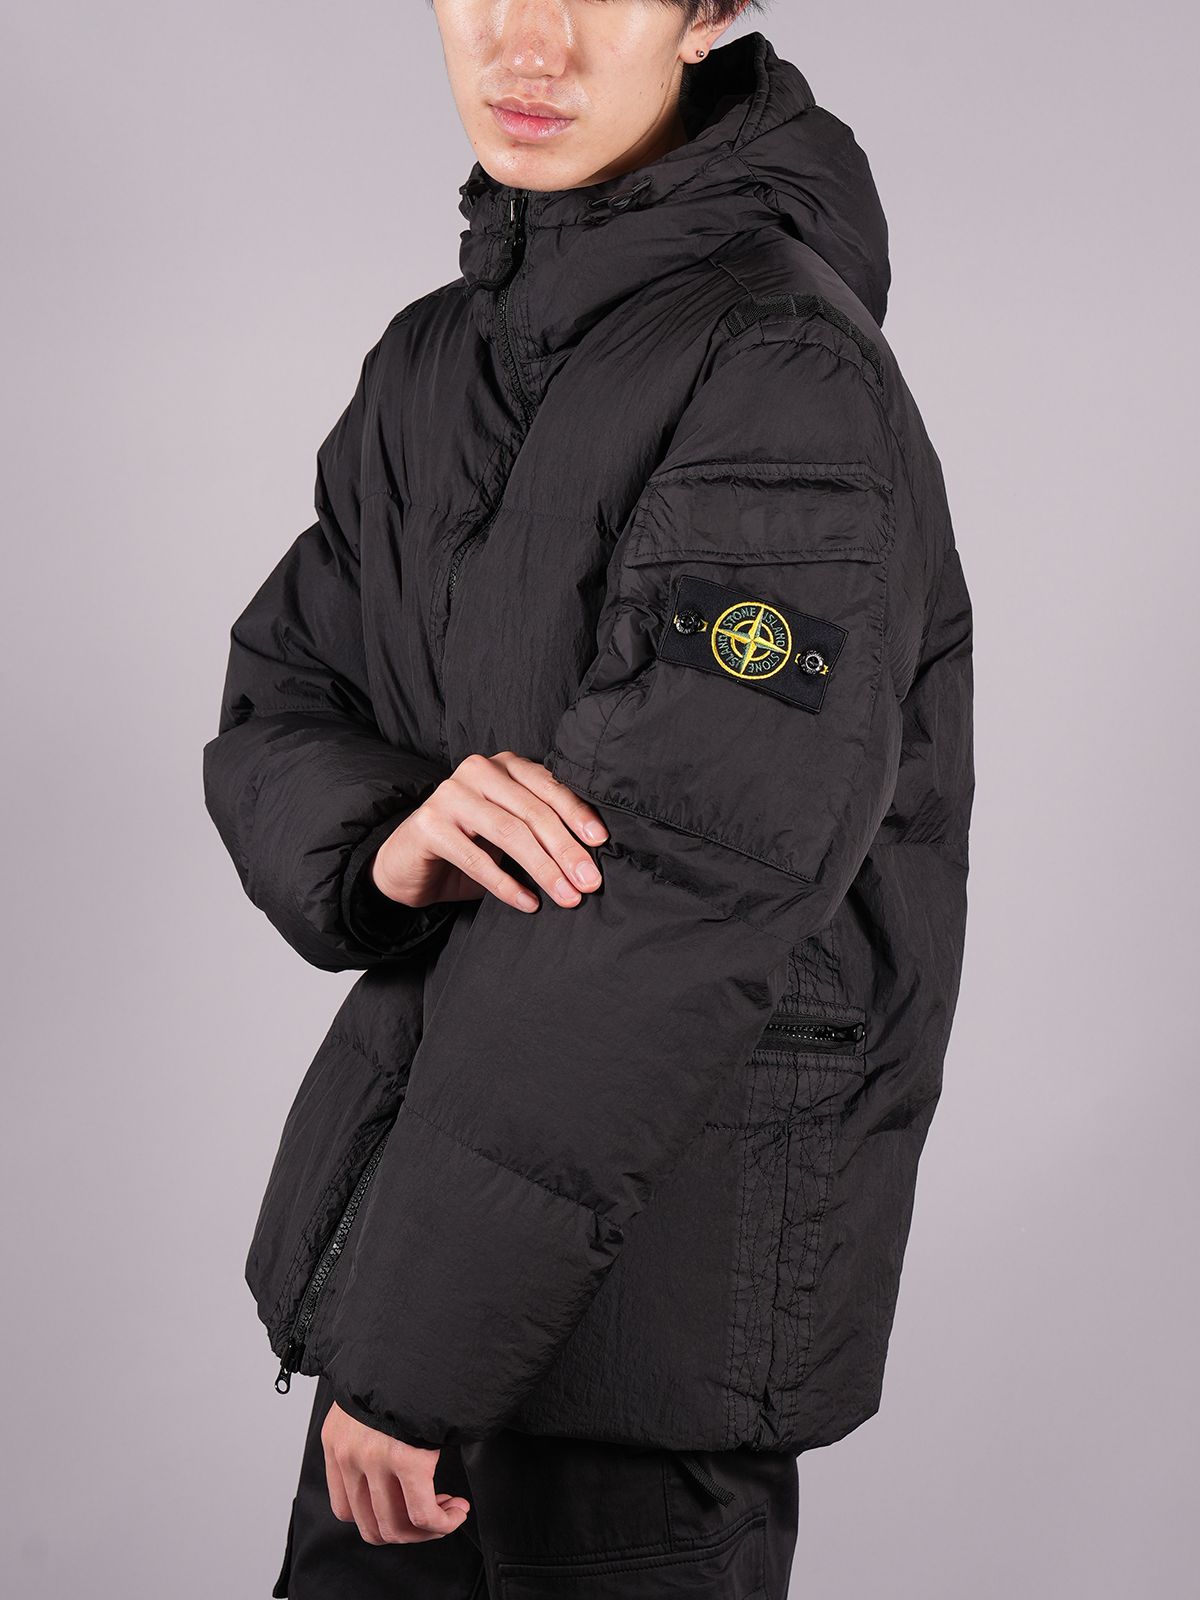 STONE ISLAND - 【残りわずか】 GARMENT DYED CRINKLE REPS R-NY 